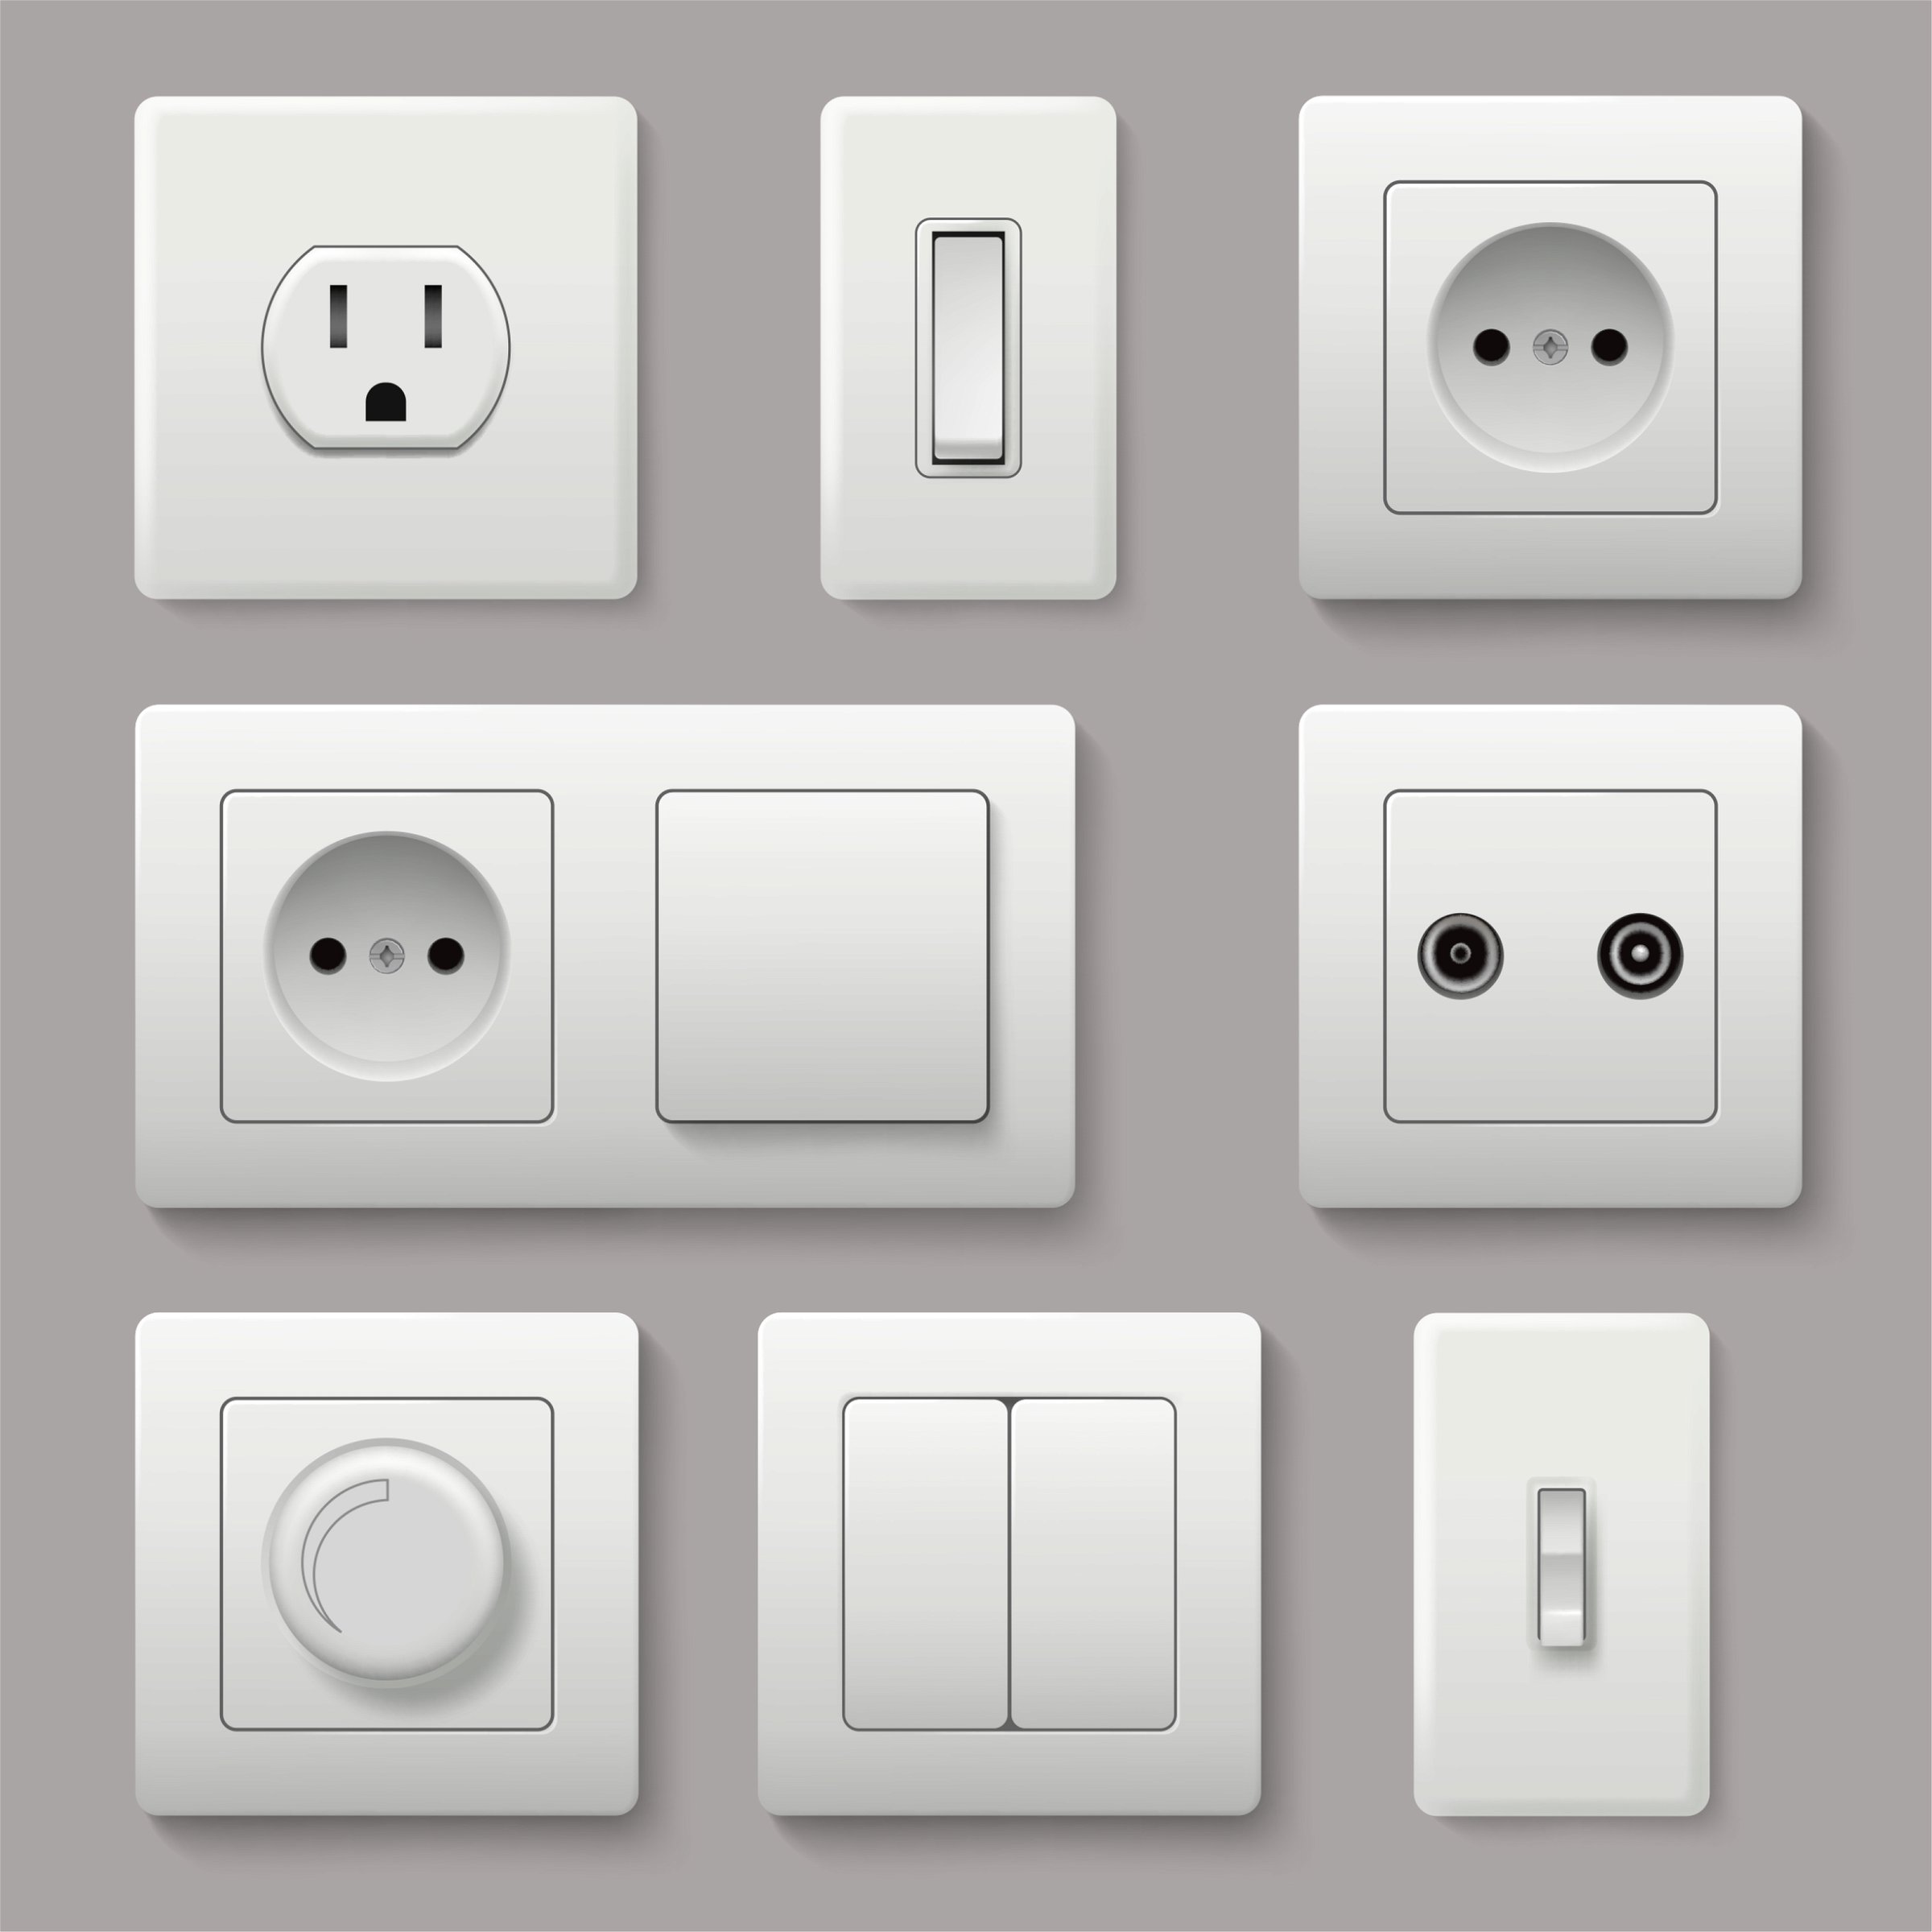 Everything About Home Switch Designs